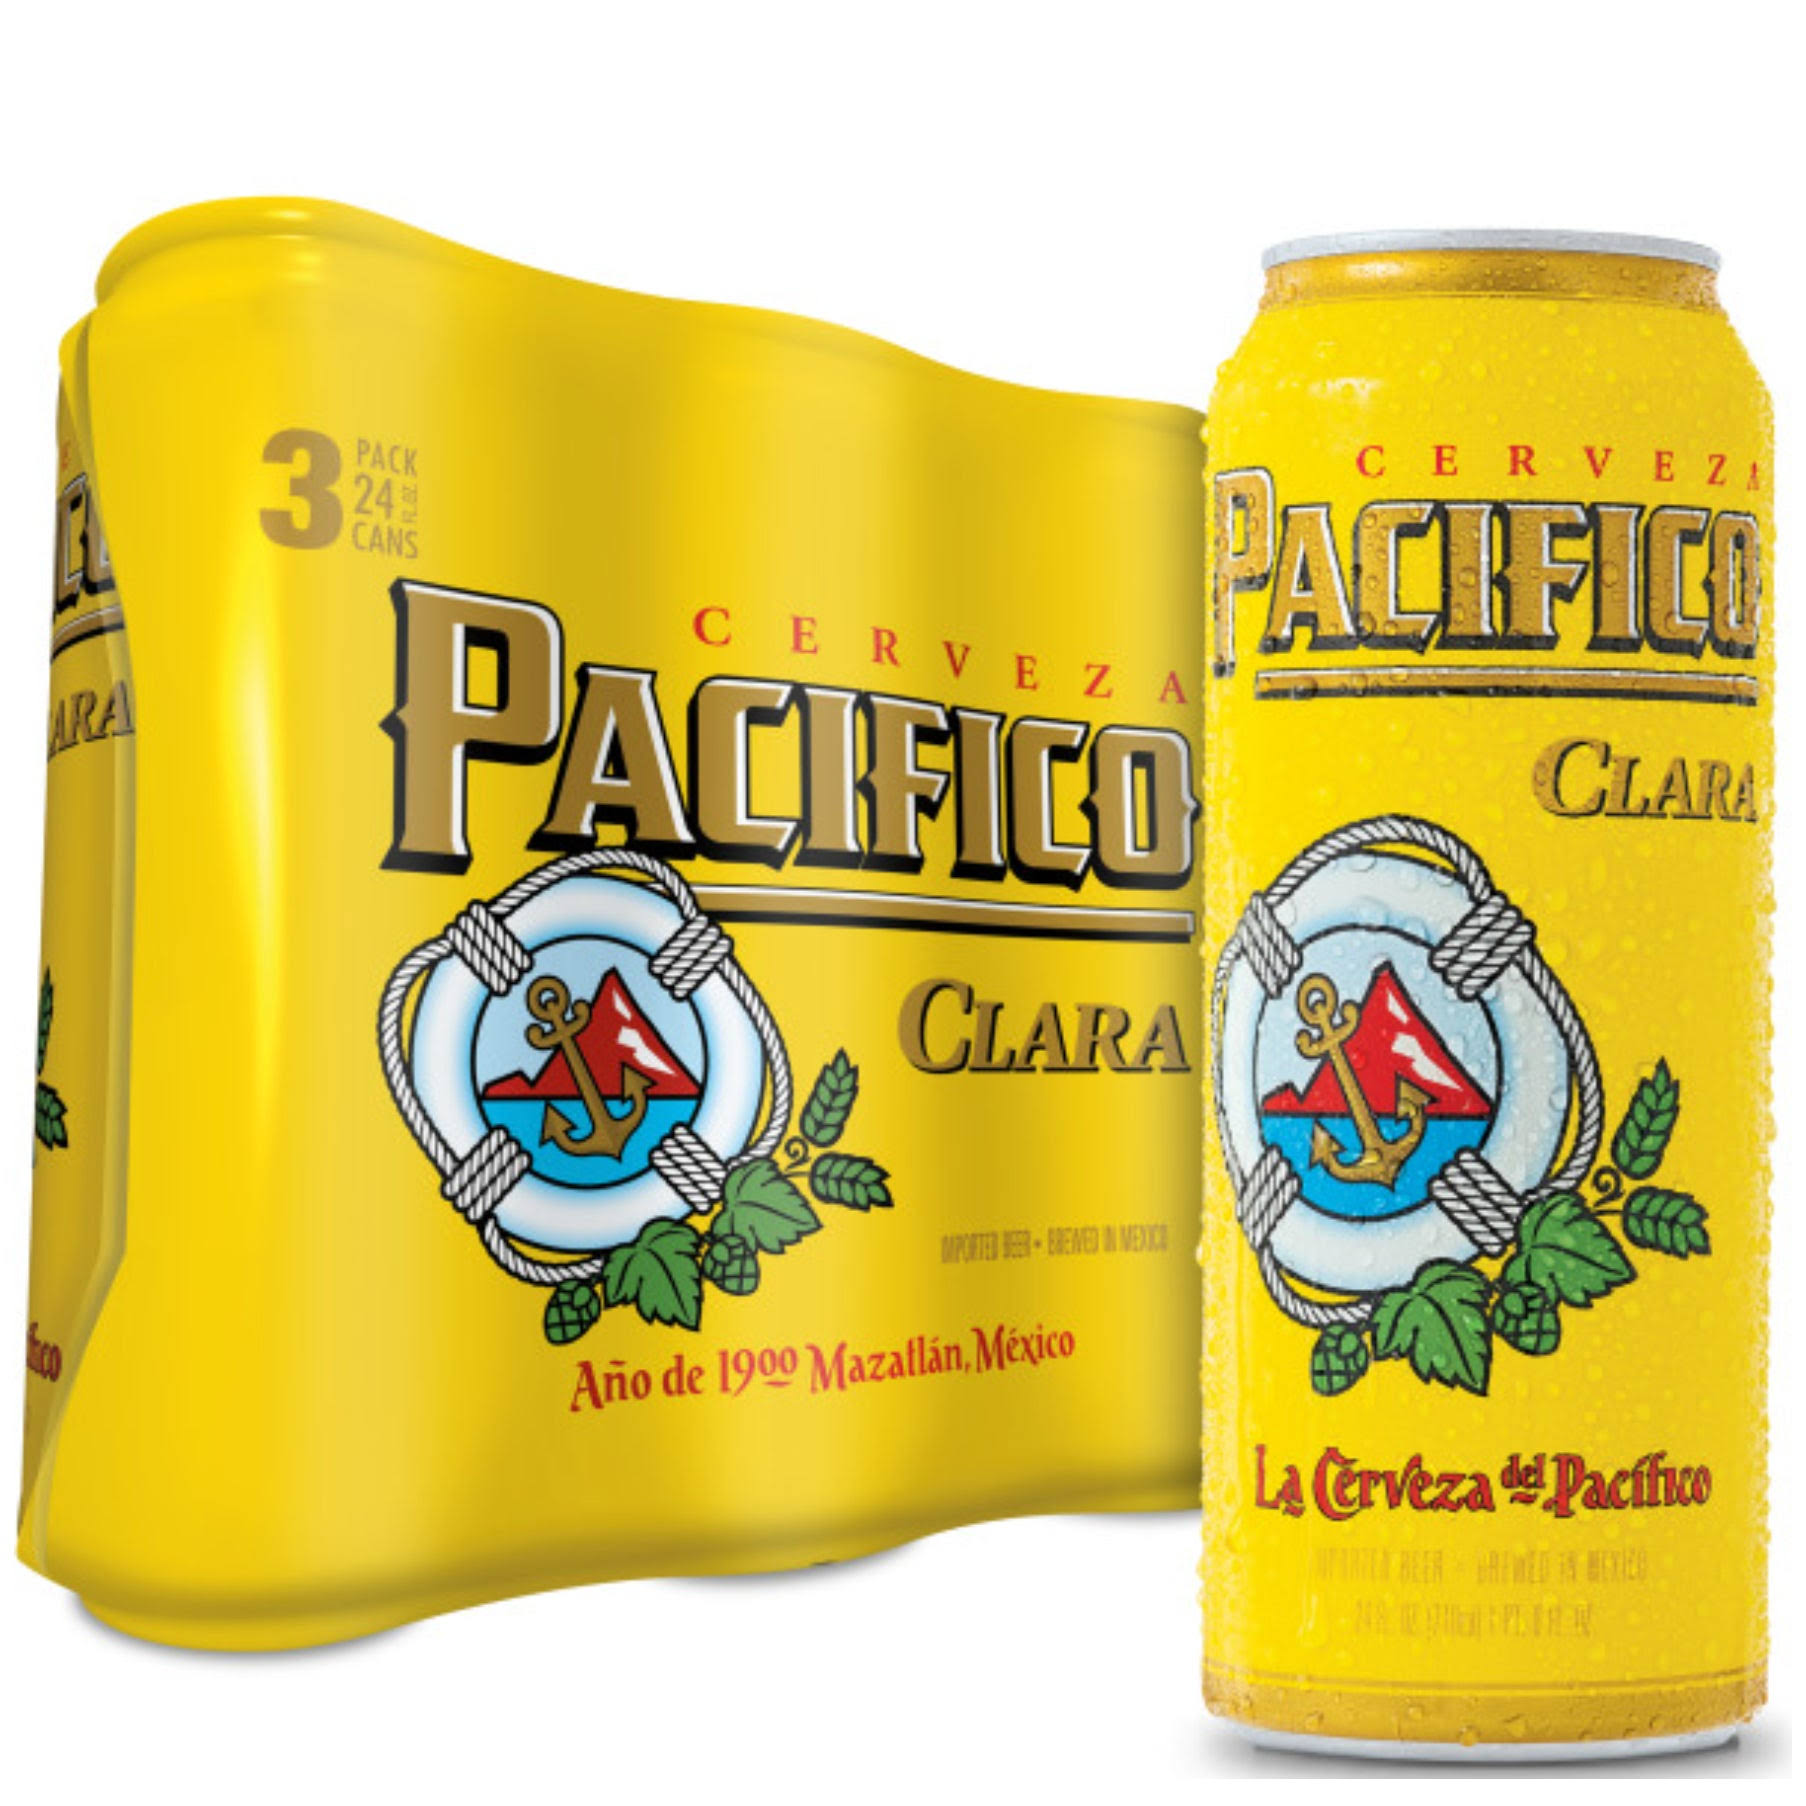 Pacifico Clara Lager Mexican Beer Cans - 24 fl oz